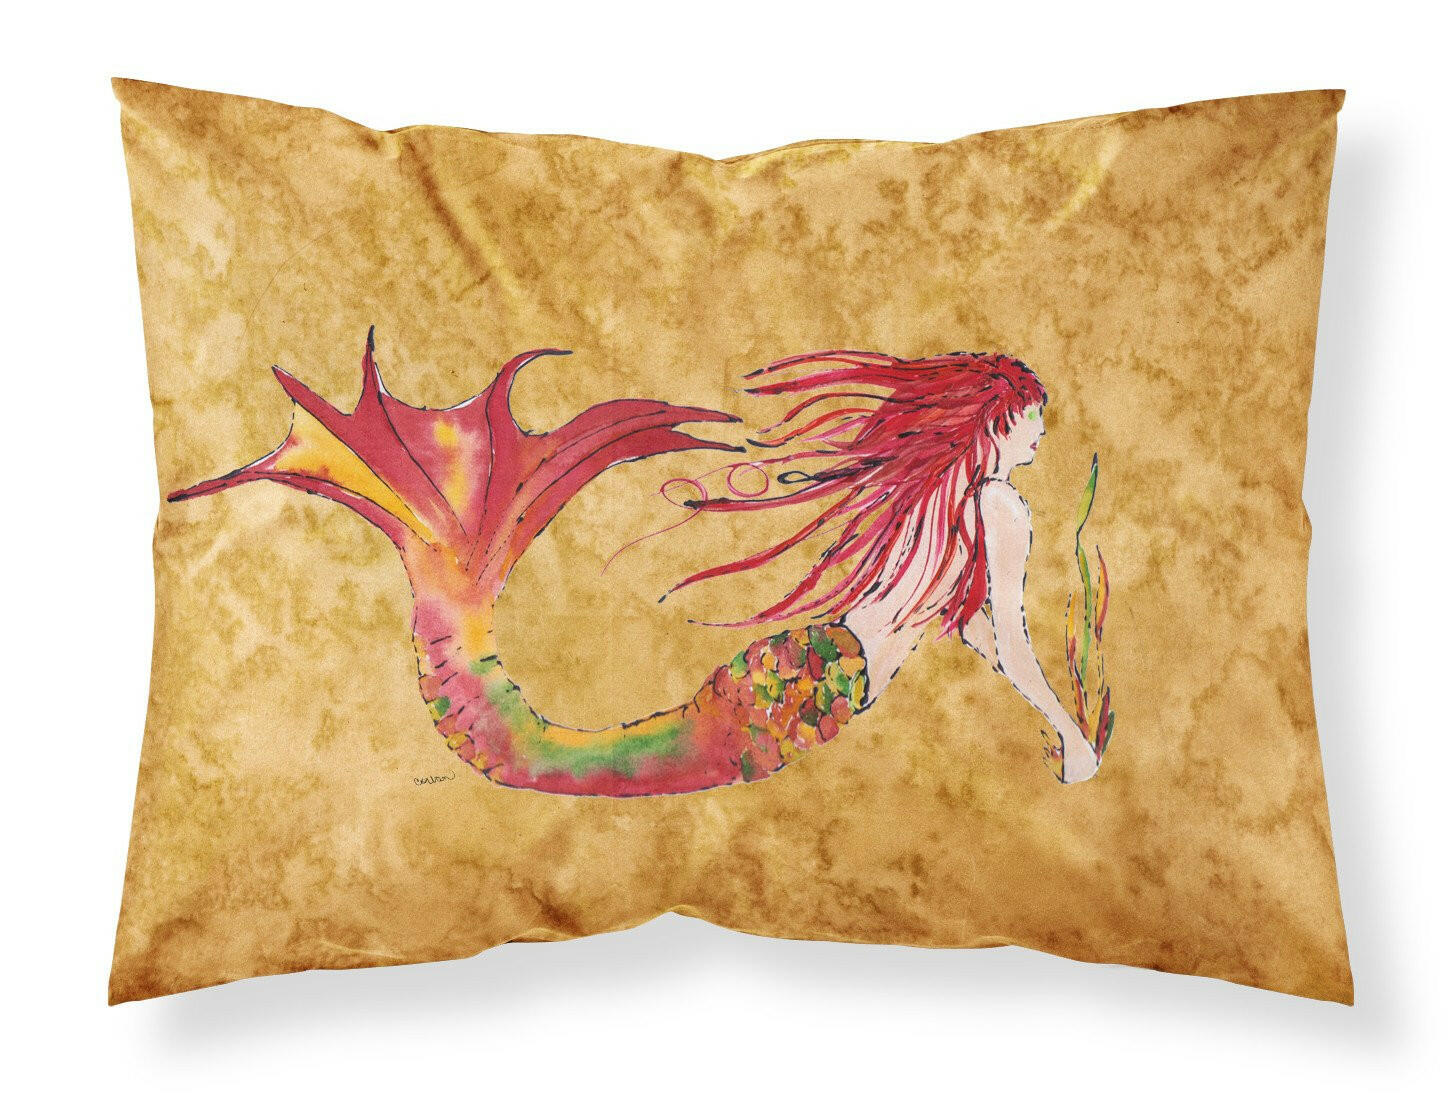 Ginger Red Headed Mermaid on Gold Fabric Standard Pillowcase 8727PILLOWCASE by Caroline's Treasures